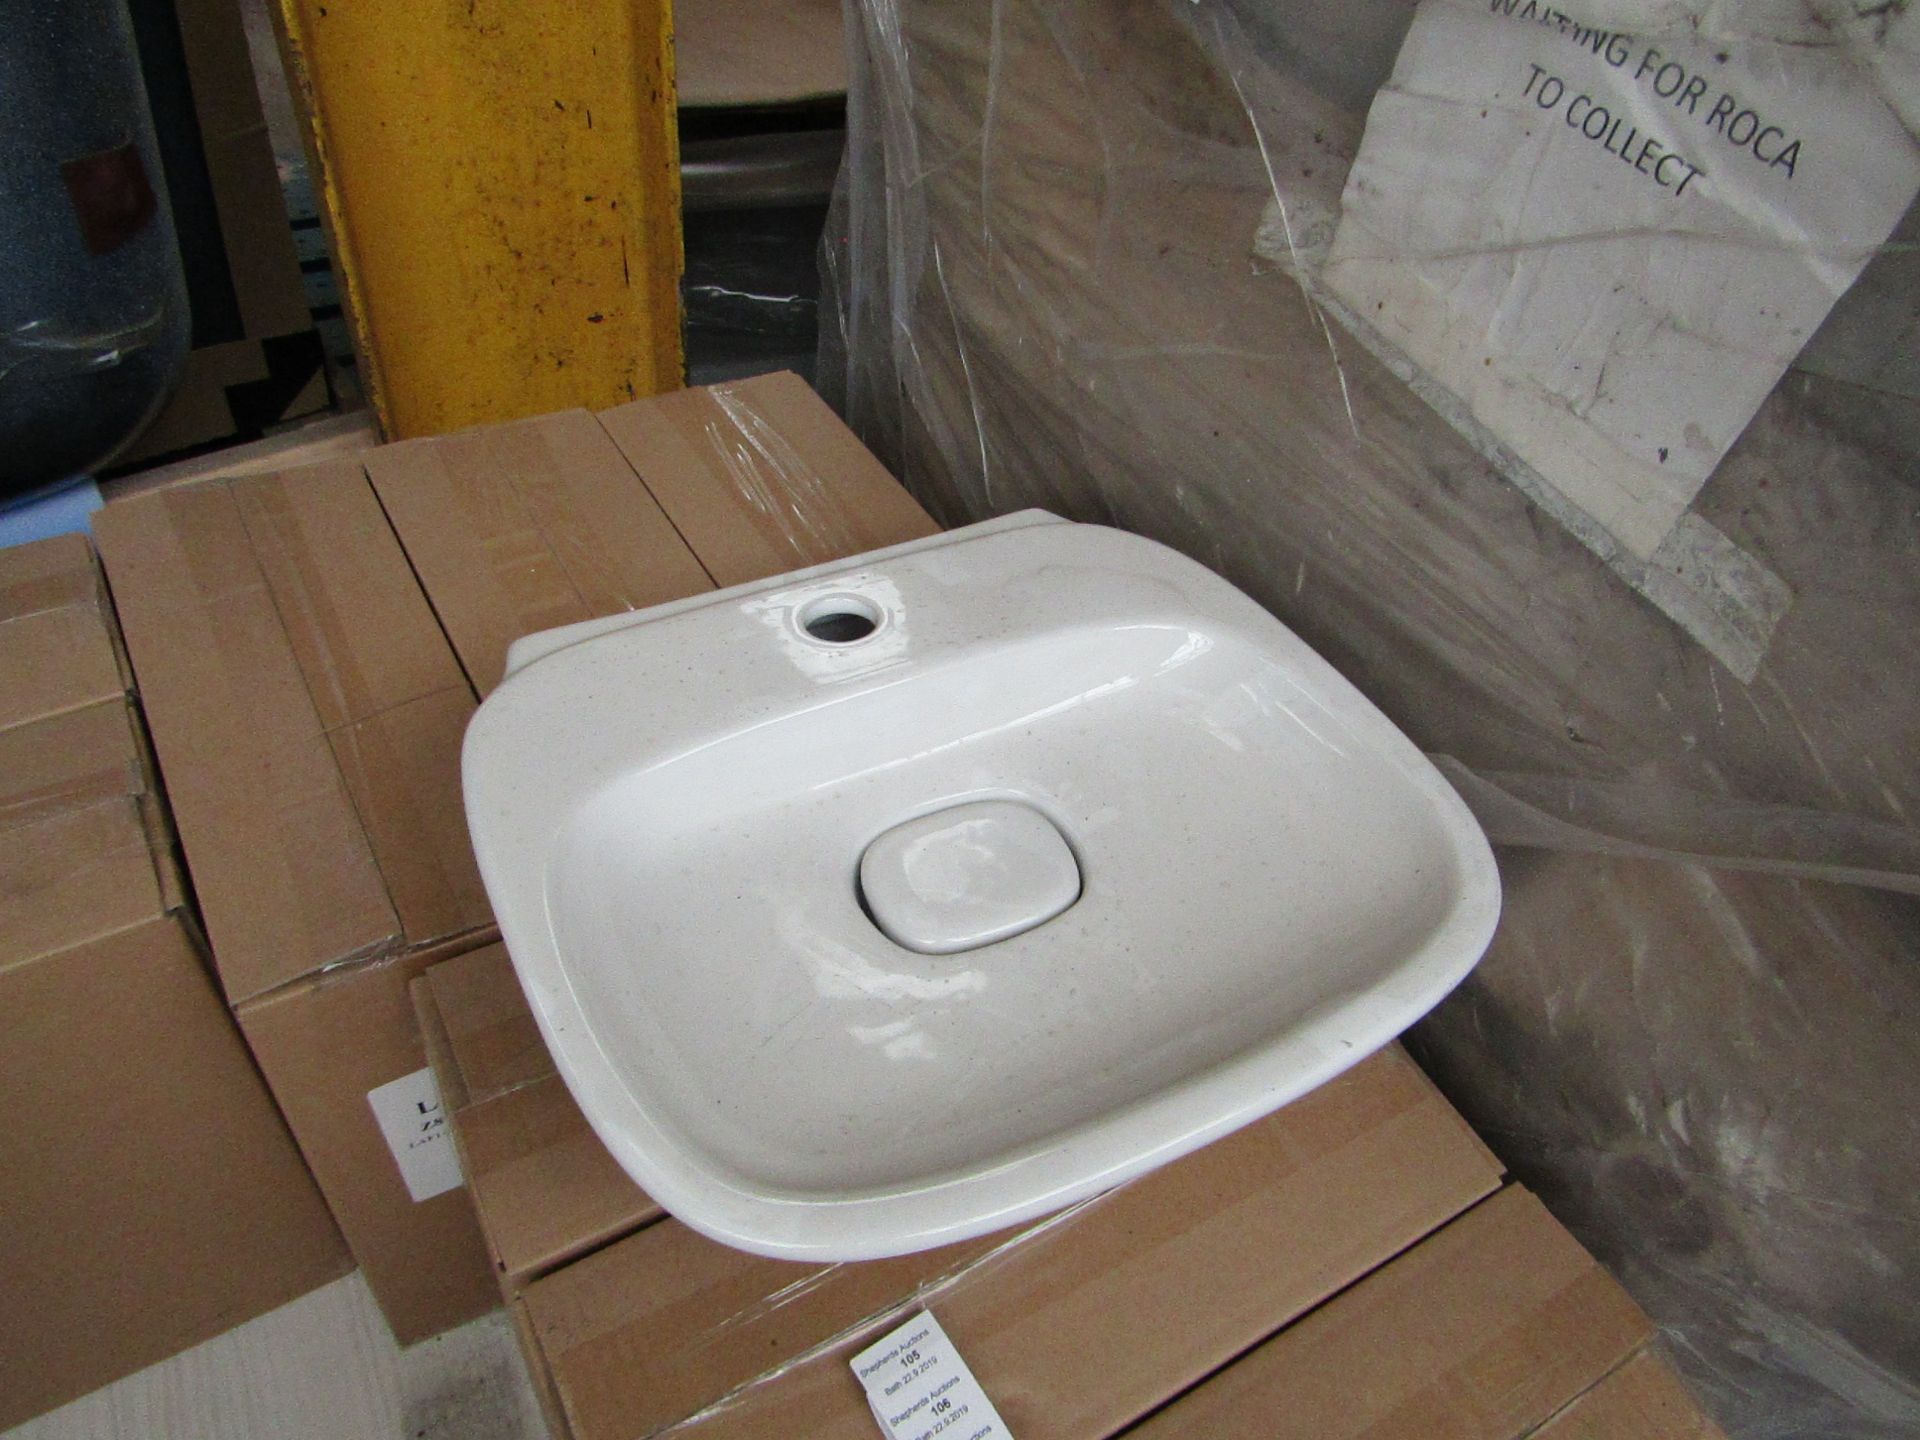 Laufen Made 400mm sink with ceramic plug cover and mono block mixer tap, new and boxed